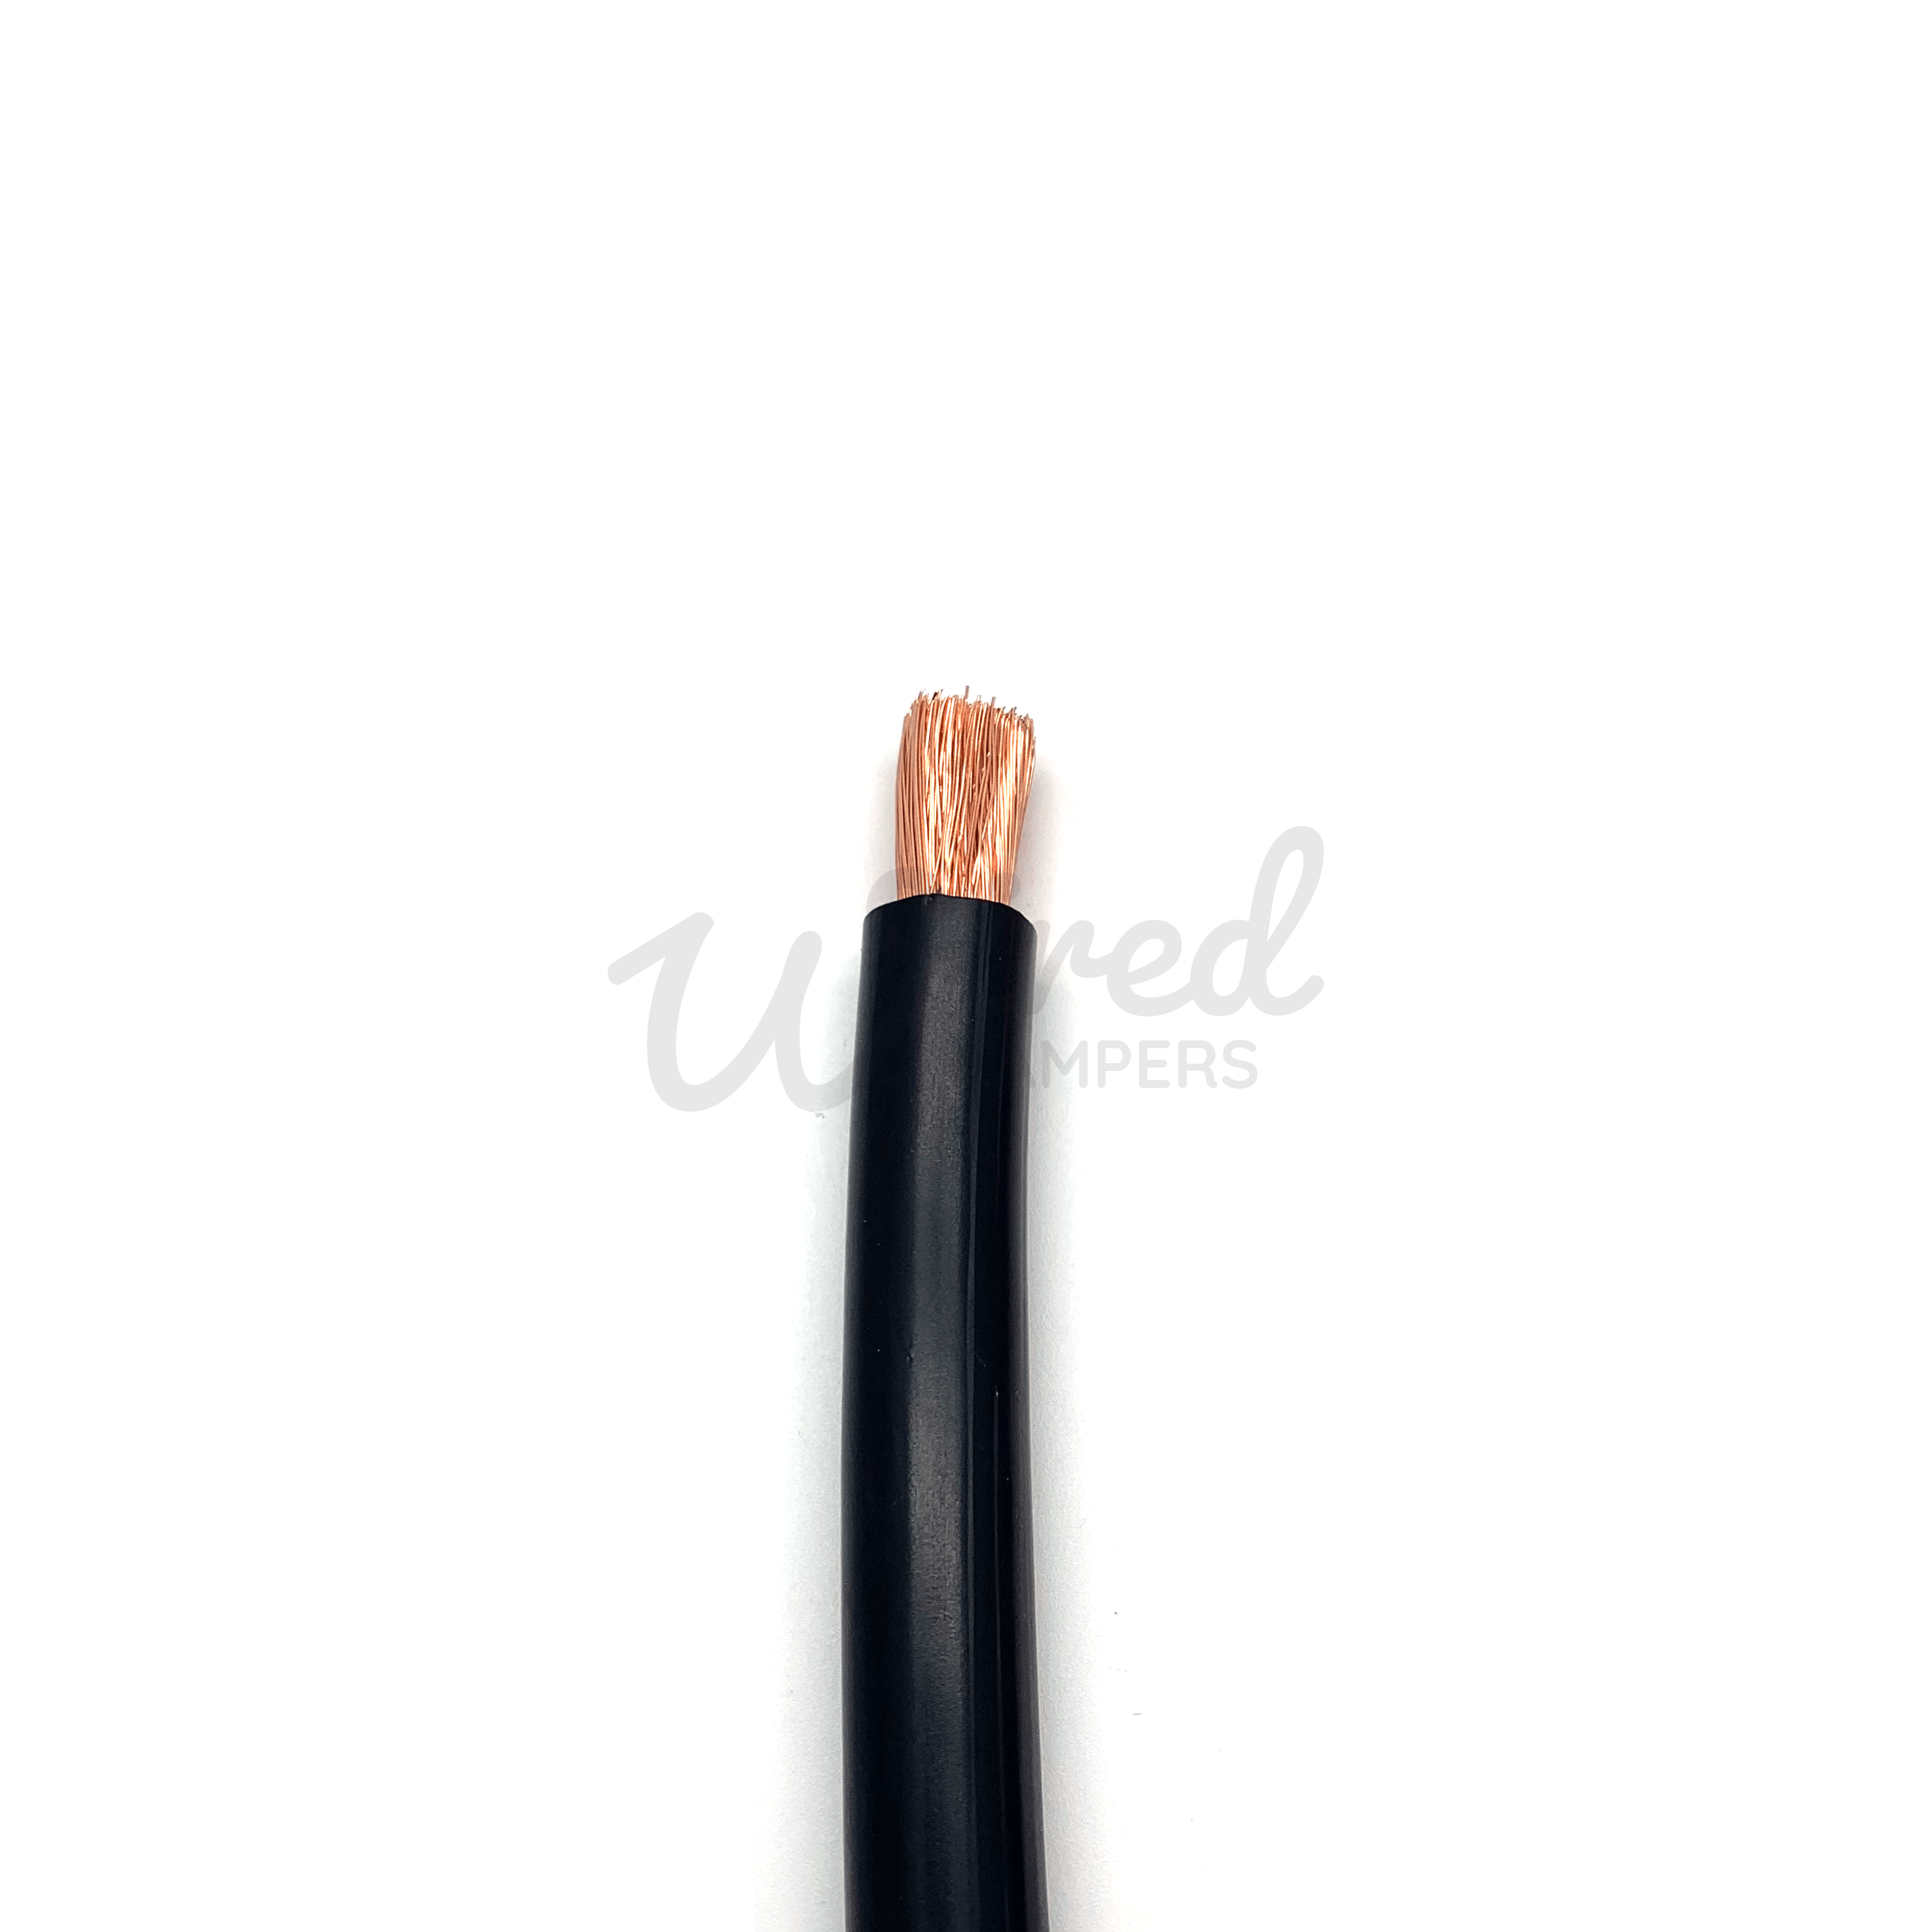 Wired Campers Limited 16mm2 110A Hi-Flex Battery/Welding/Inverter Flexible Cable - Black Negative